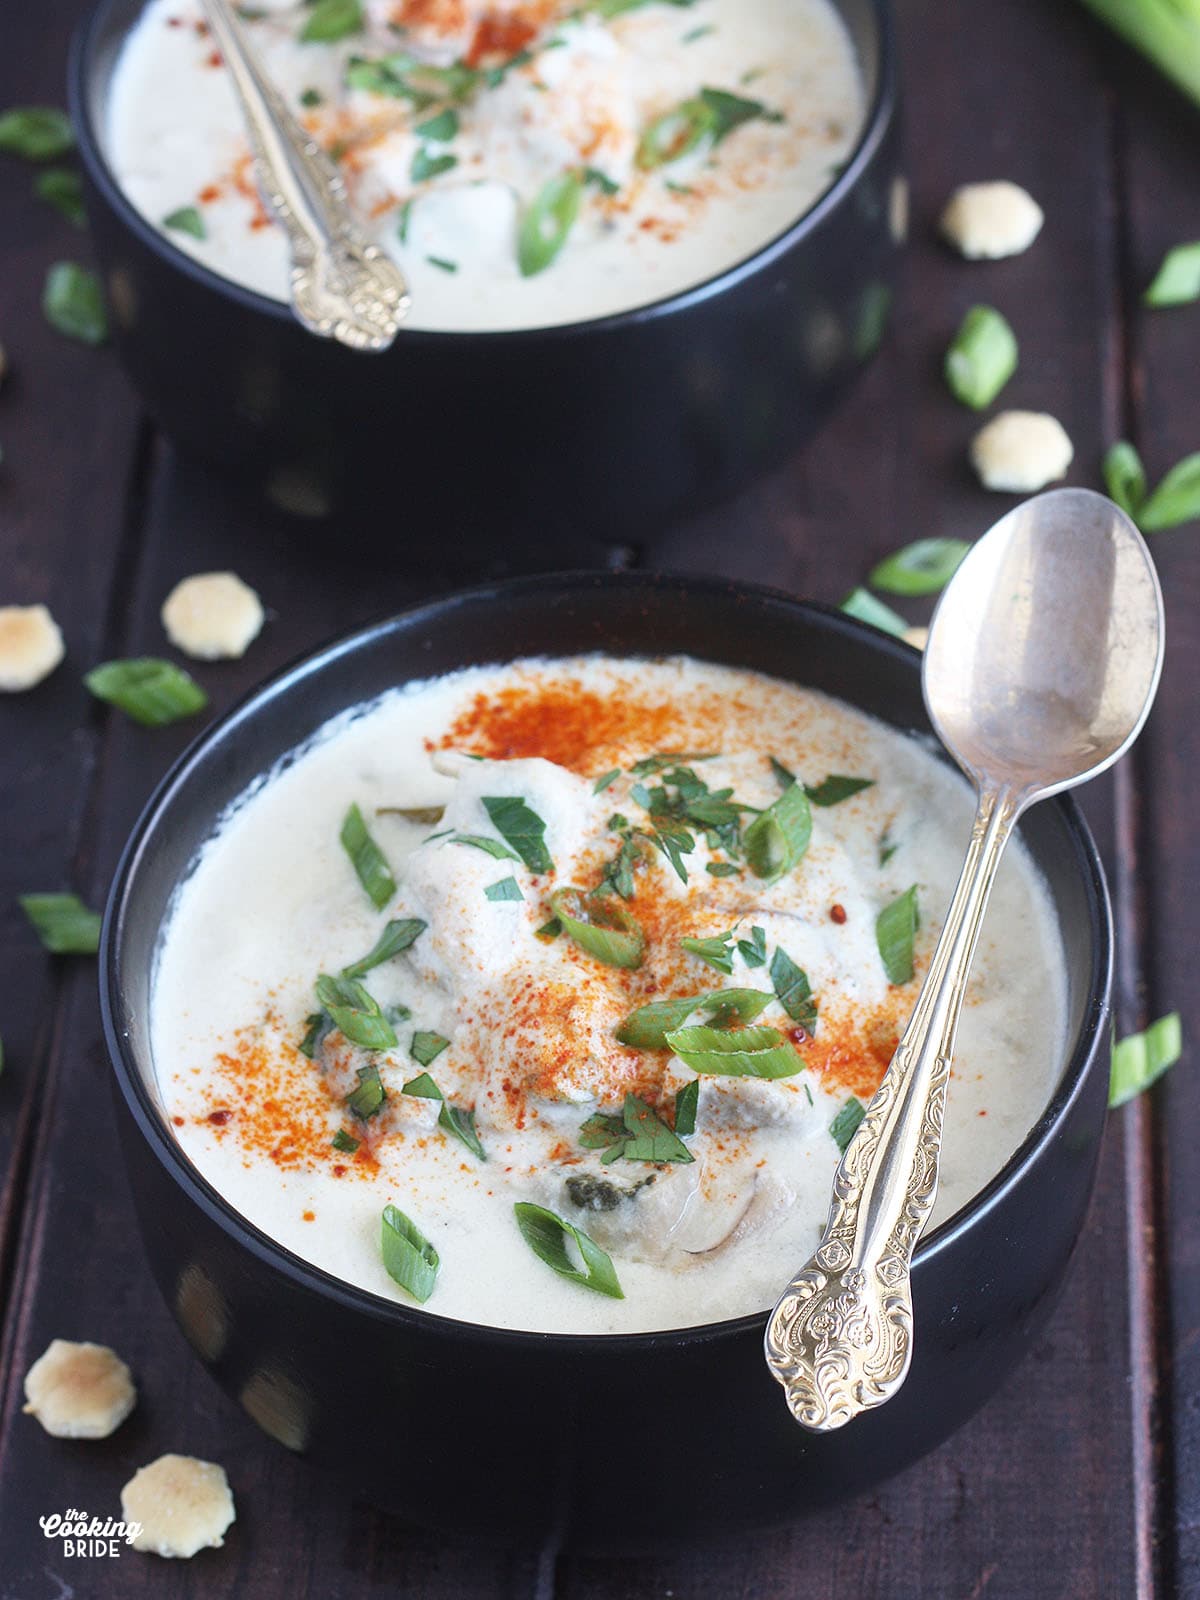 two bowls of oyster stew garnished with green onions and cayenne pepper served in black bowls with a spoon resting on the side